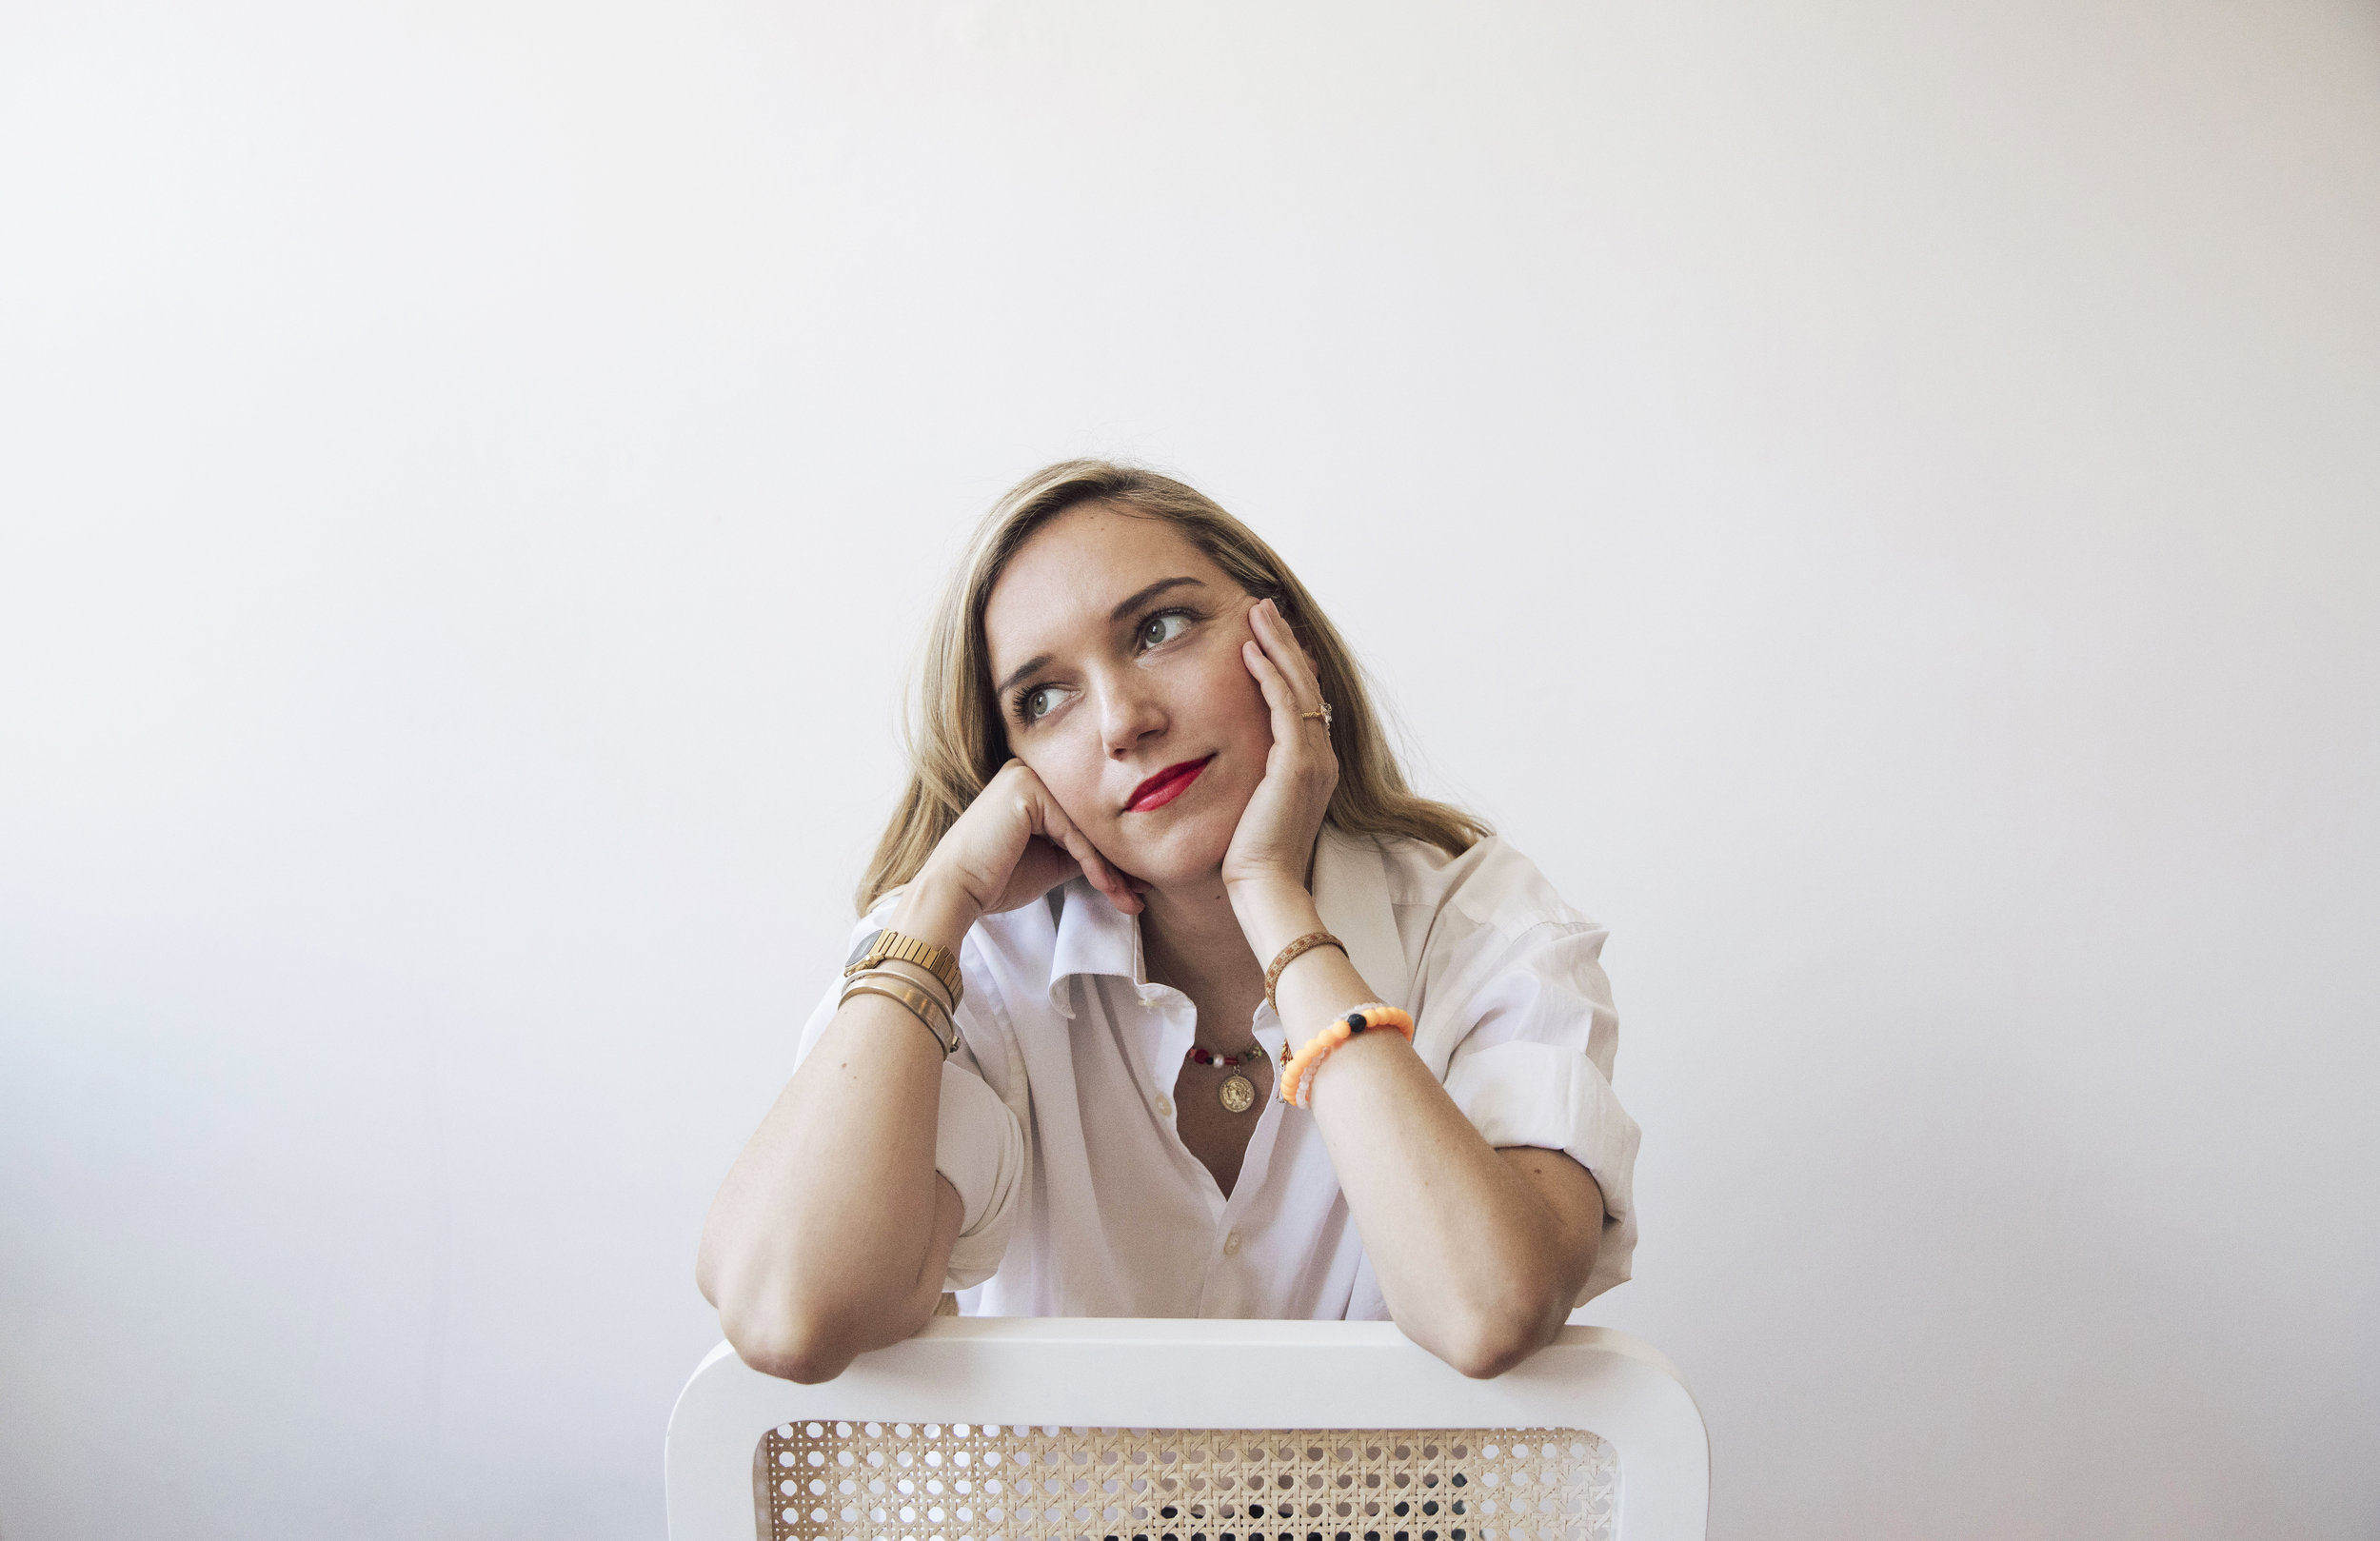 see me creative founder Sara McDowell is in Pursuit of Self